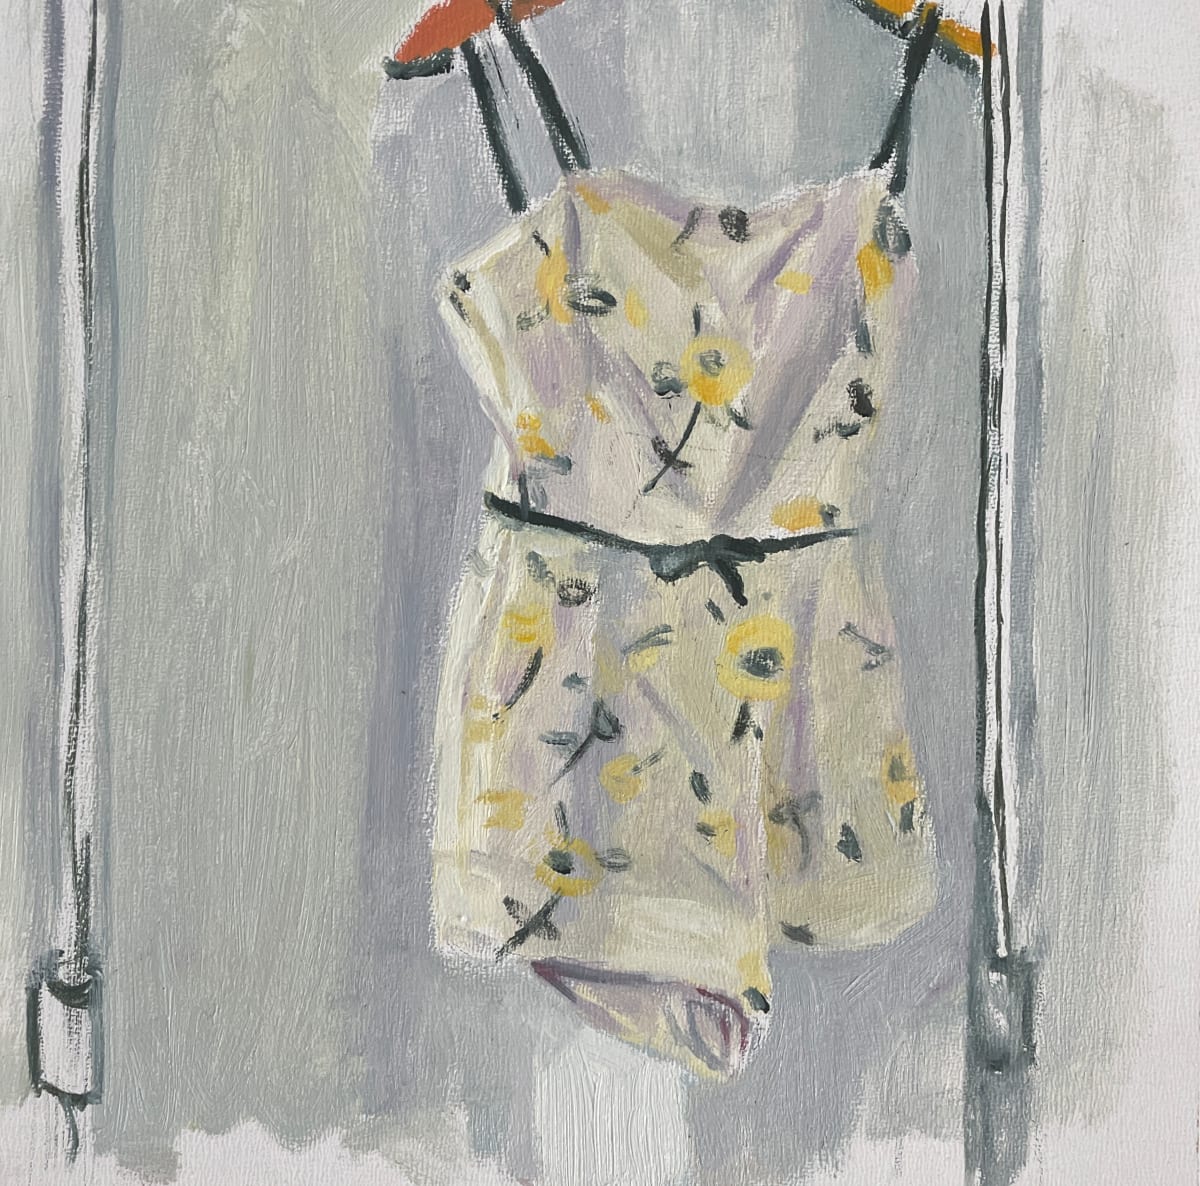 Nanny's Bathing Costume by Nan Ring  Image: Nanny's Bathing Costume, oil on panel, 6 x 6 inches, 2022